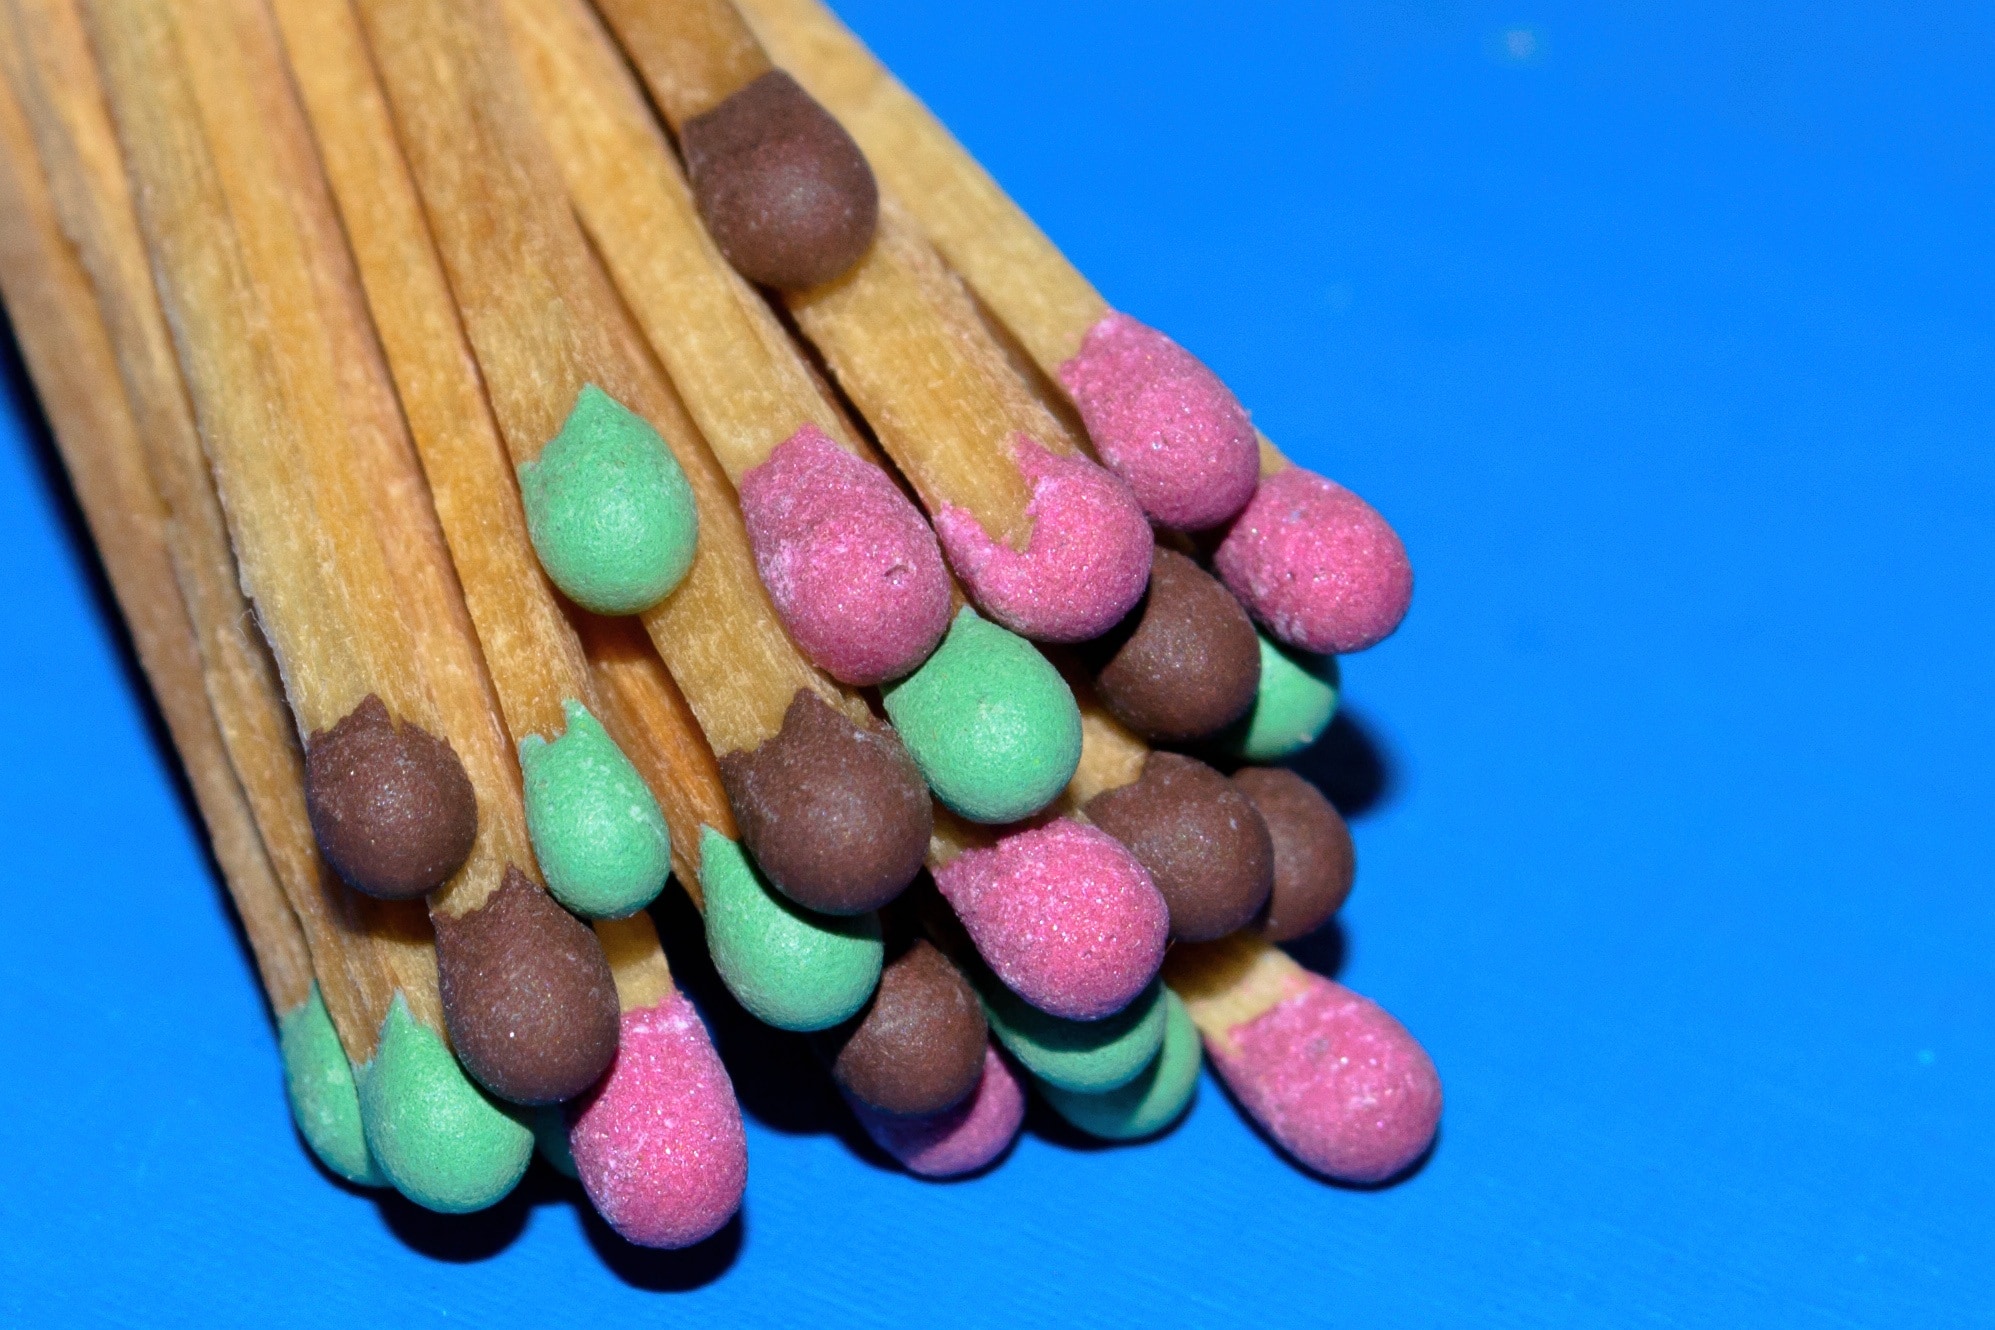 Matches, Pink Match, Match Green, Match, multi colored, large group of objects